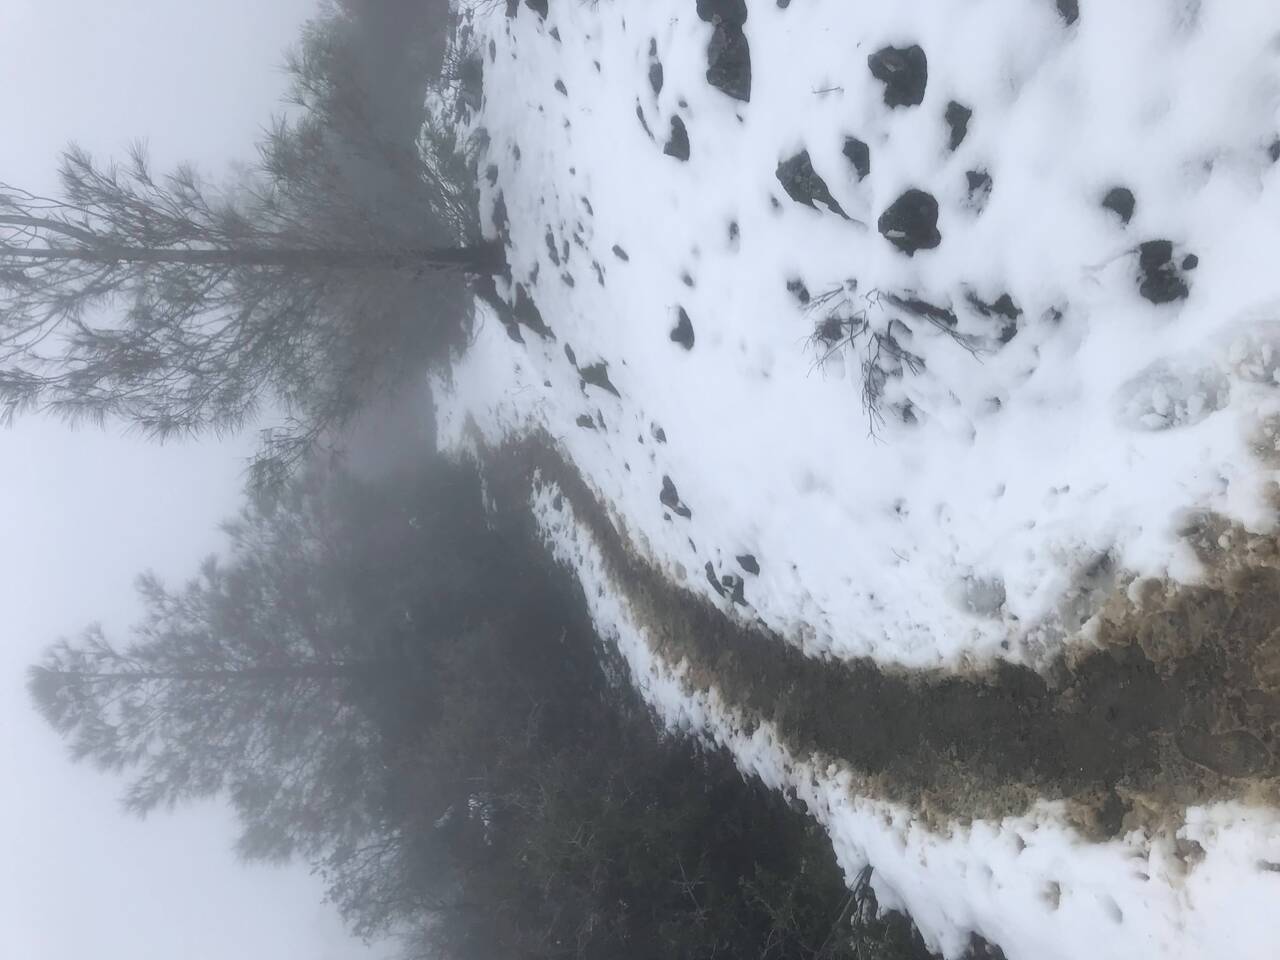 A muddy trail winds up a snowy fog-covered hill